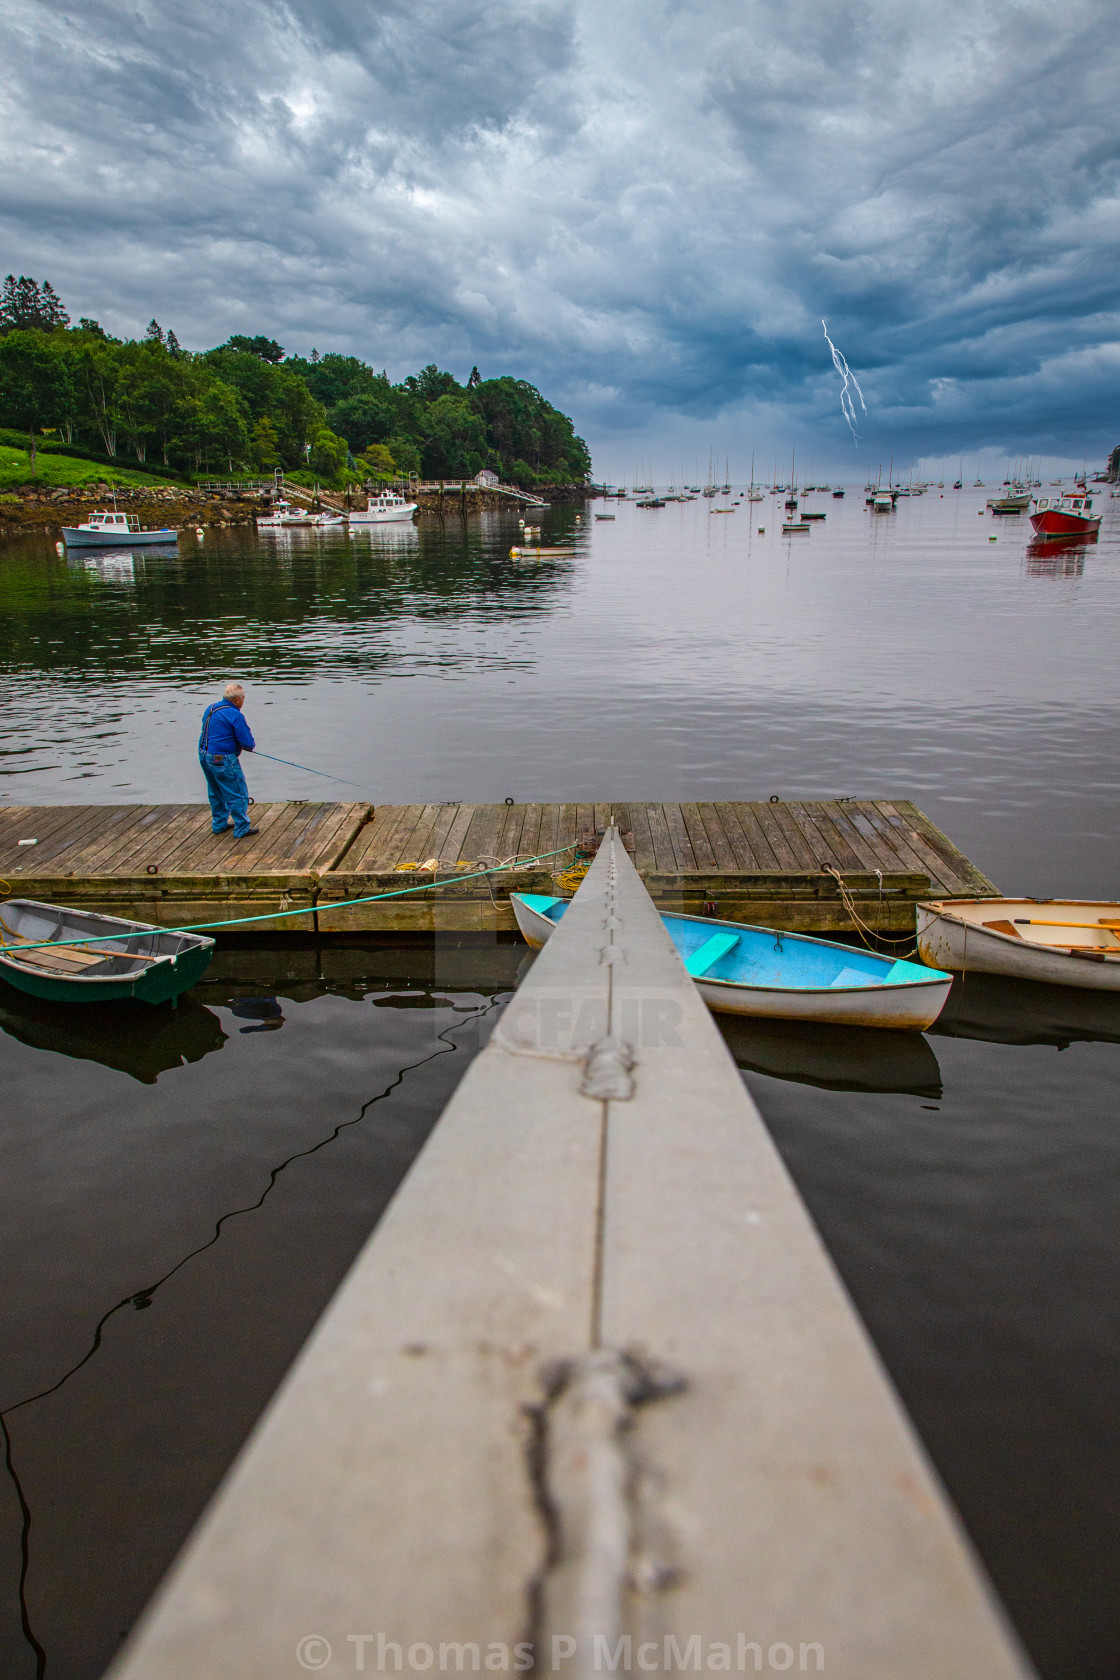 "Fishing off the dock in a storm with lighting" stock image